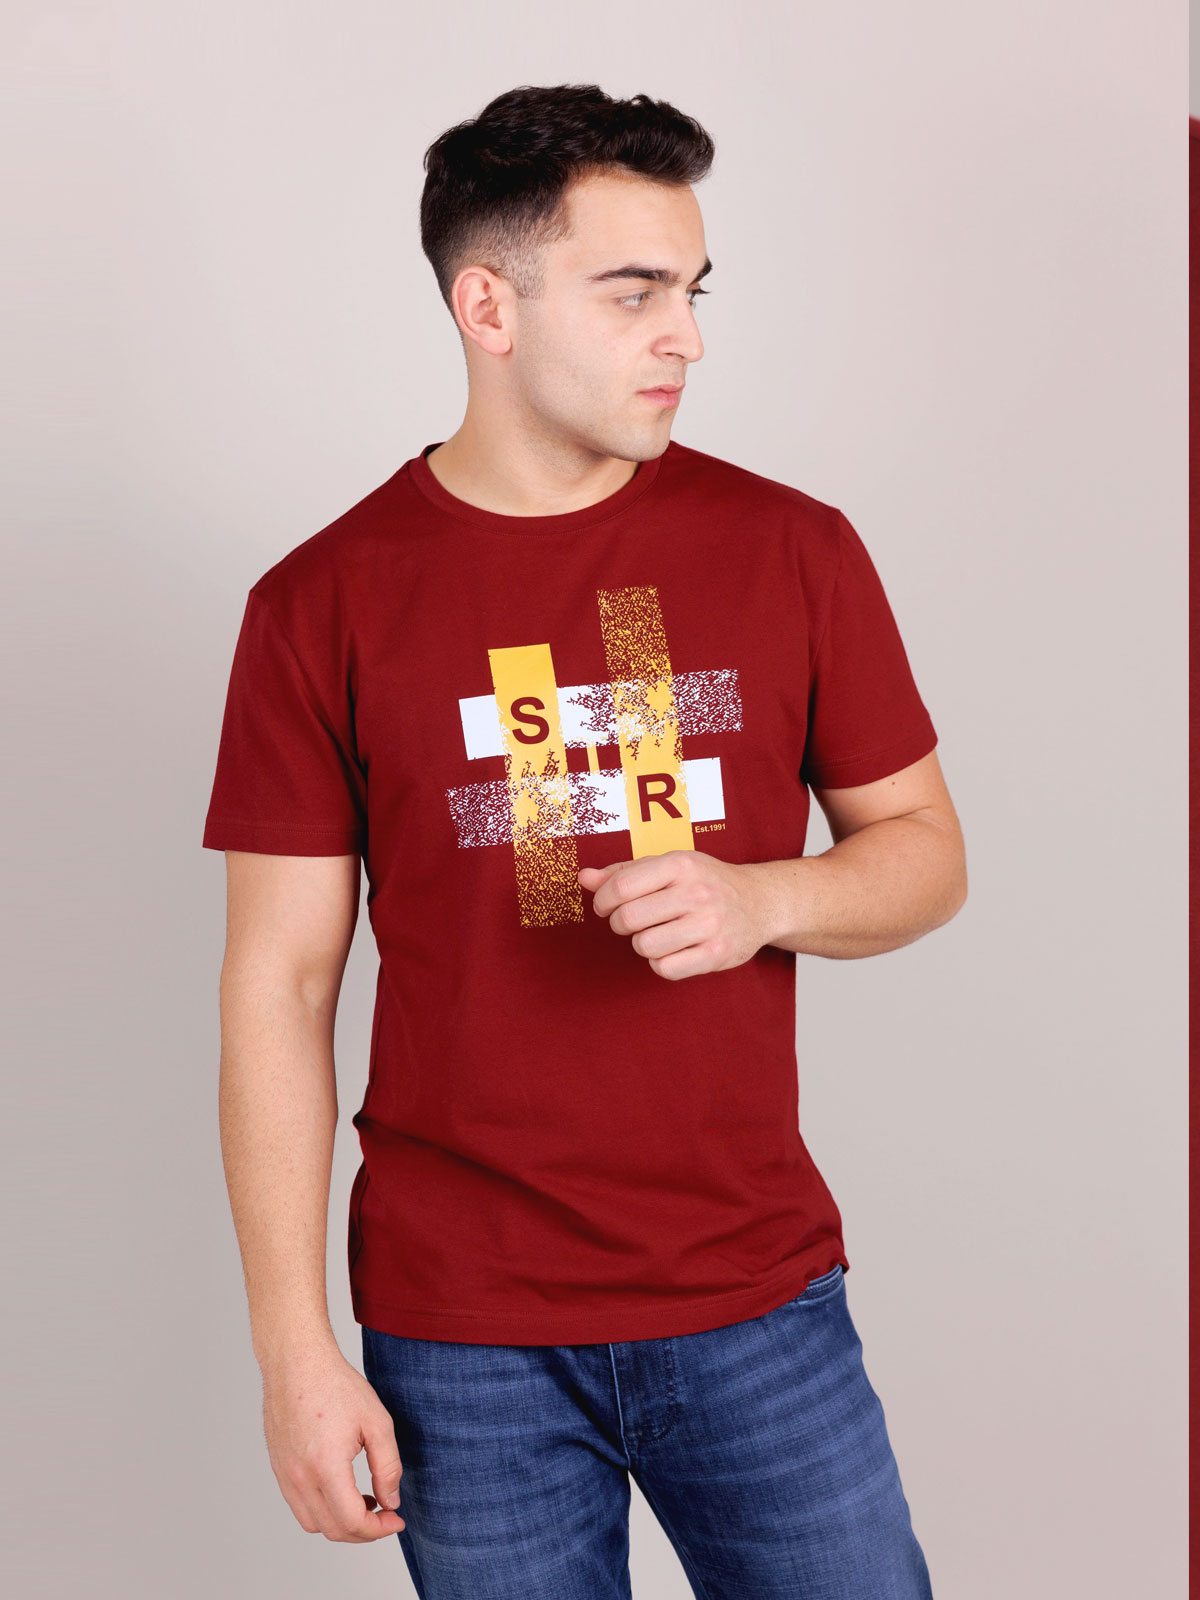 Tshirt in burgundy with a color print - 96460 € 23.62 img4